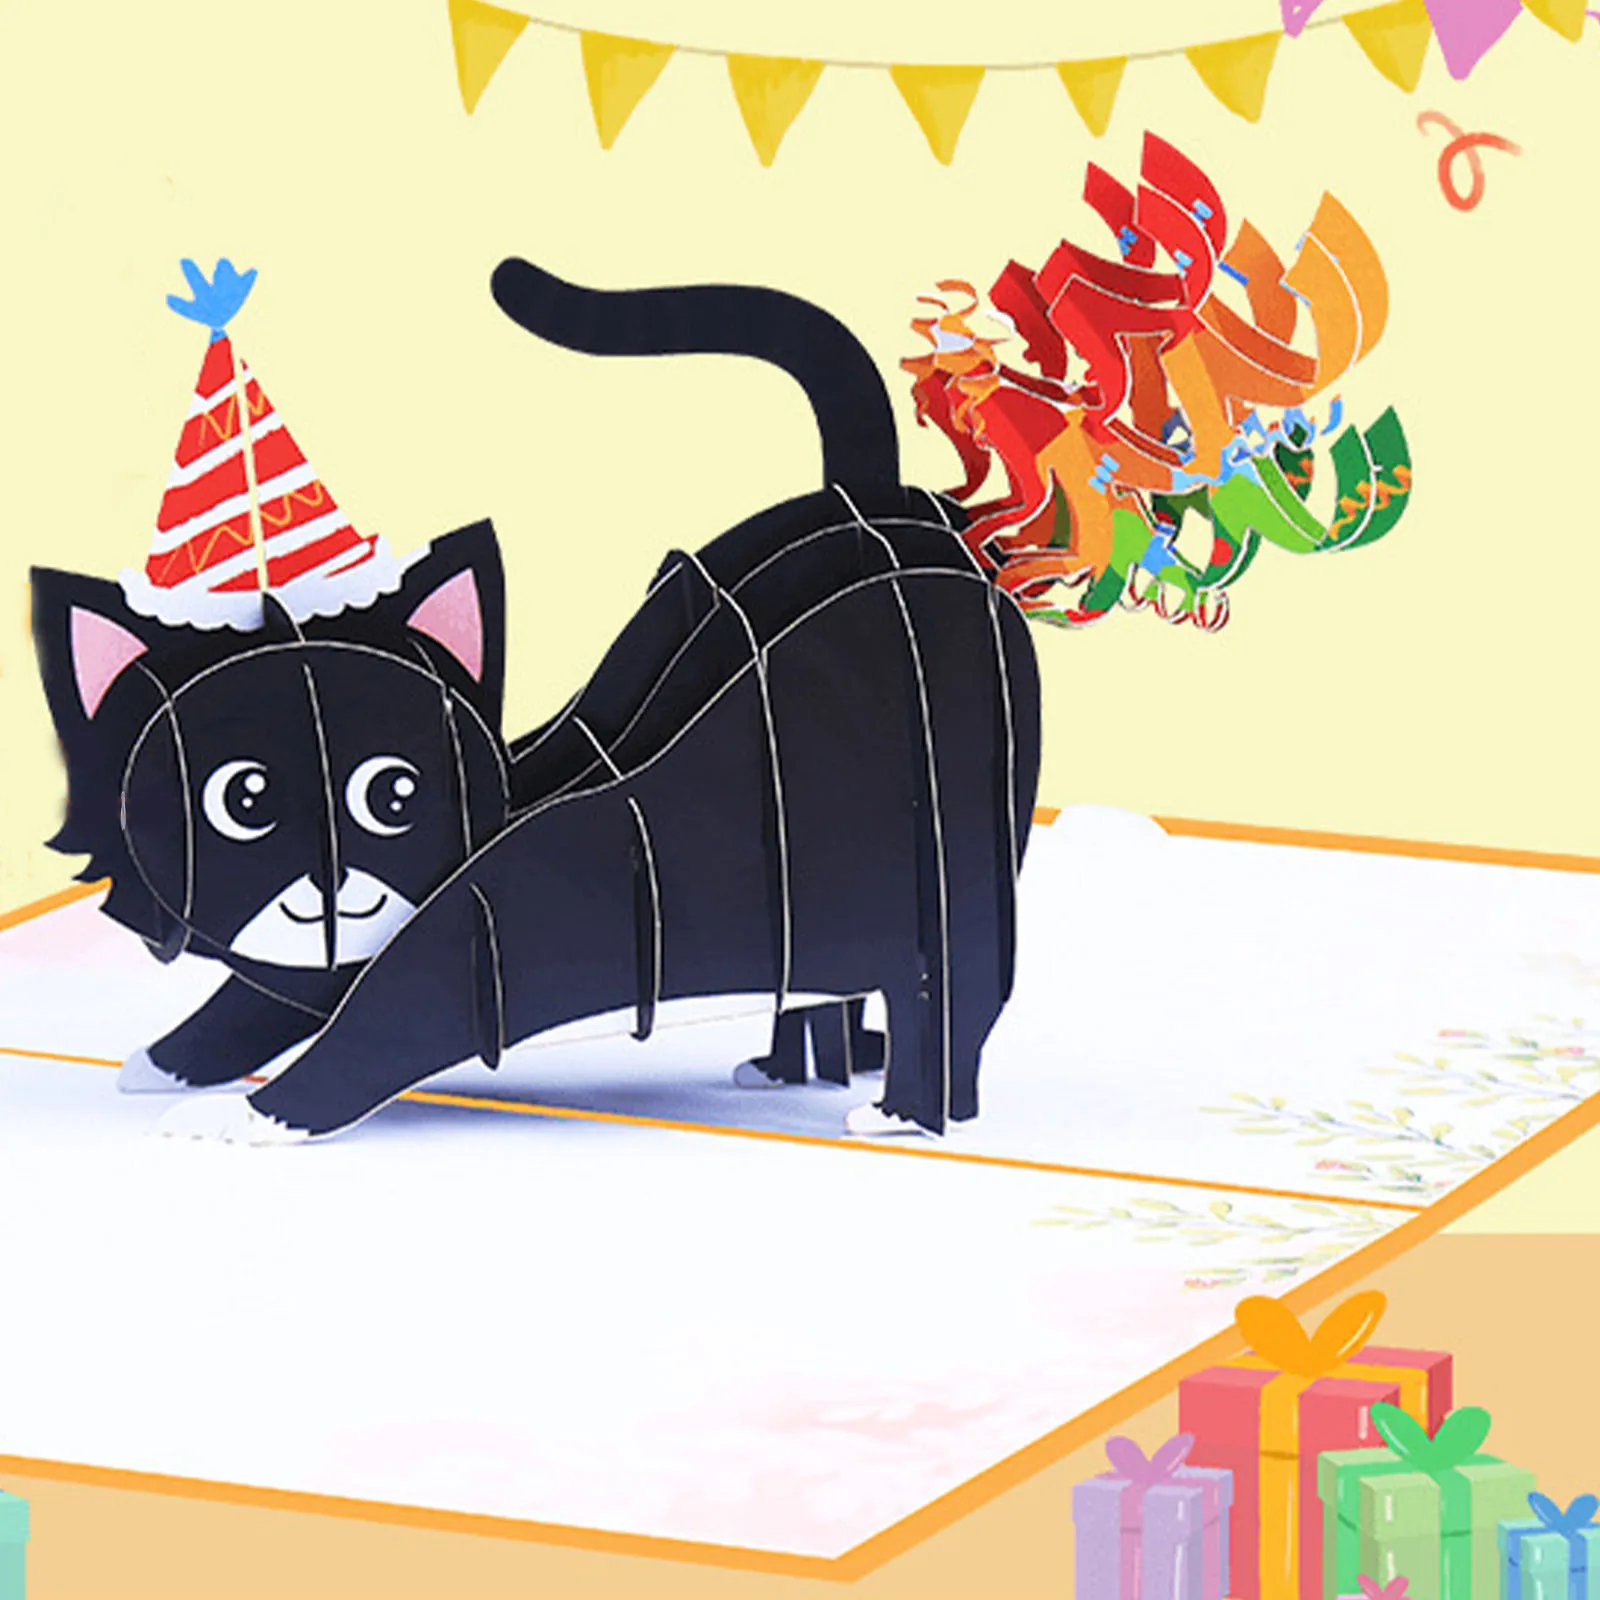 

Envelopes Greeting Cards Unmatched 3D 5x7 Inches Birthday Card Black Cat Envelope Postcards Explosive Laughter